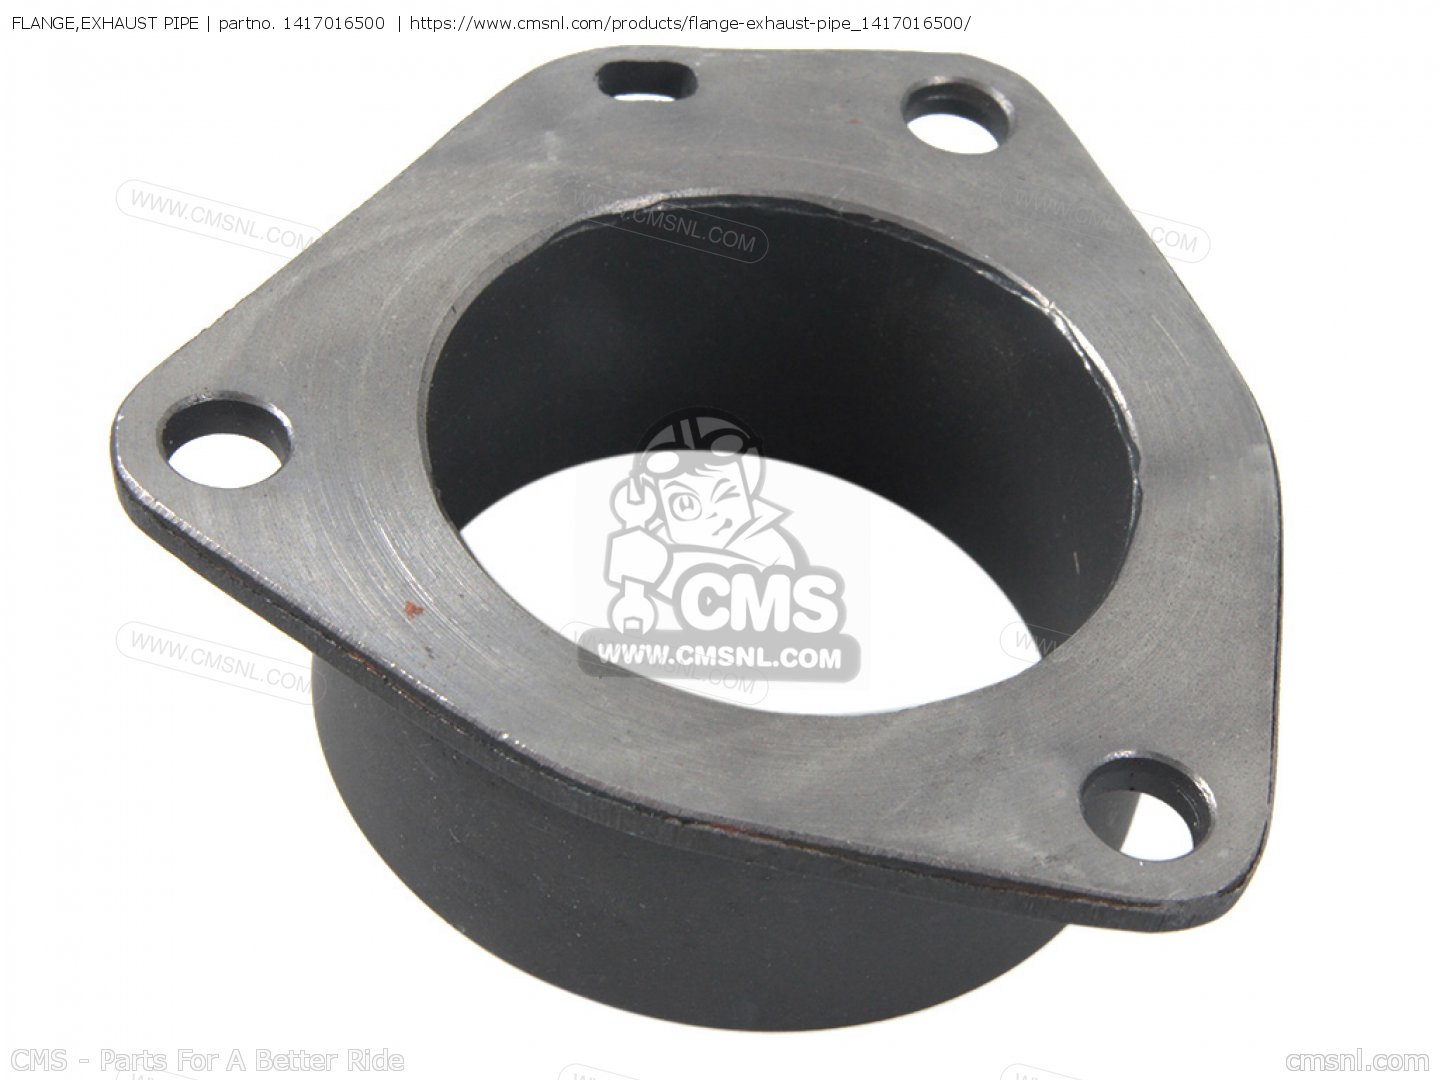 FLANGE,EXHAUST PIPE for TM250 1974 (L) USA (E03) - order at CMSNL